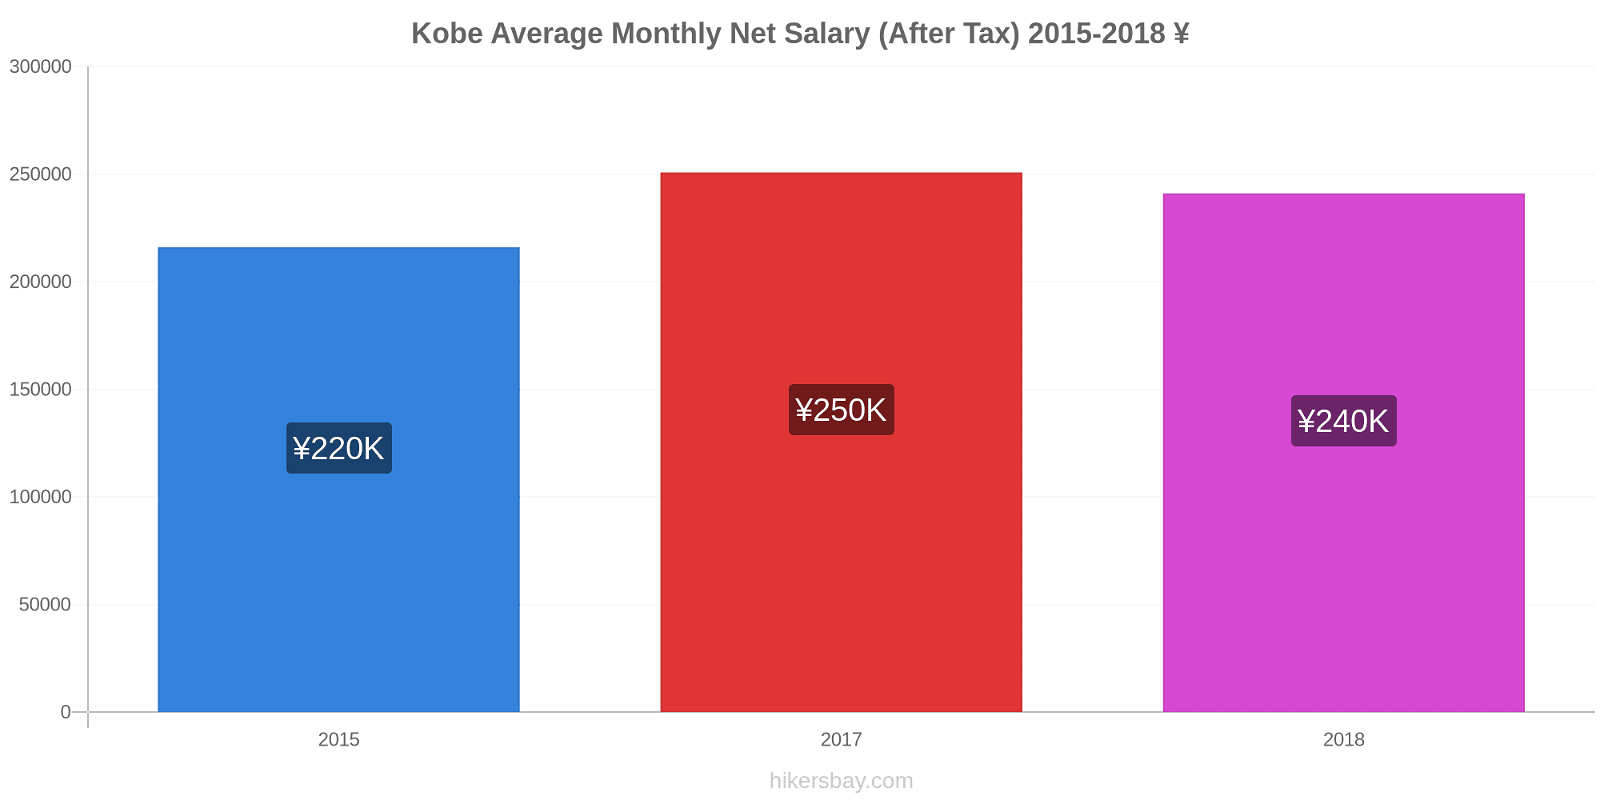 Kobe price changes Average Monthly Net Salary (After Tax) hikersbay.com